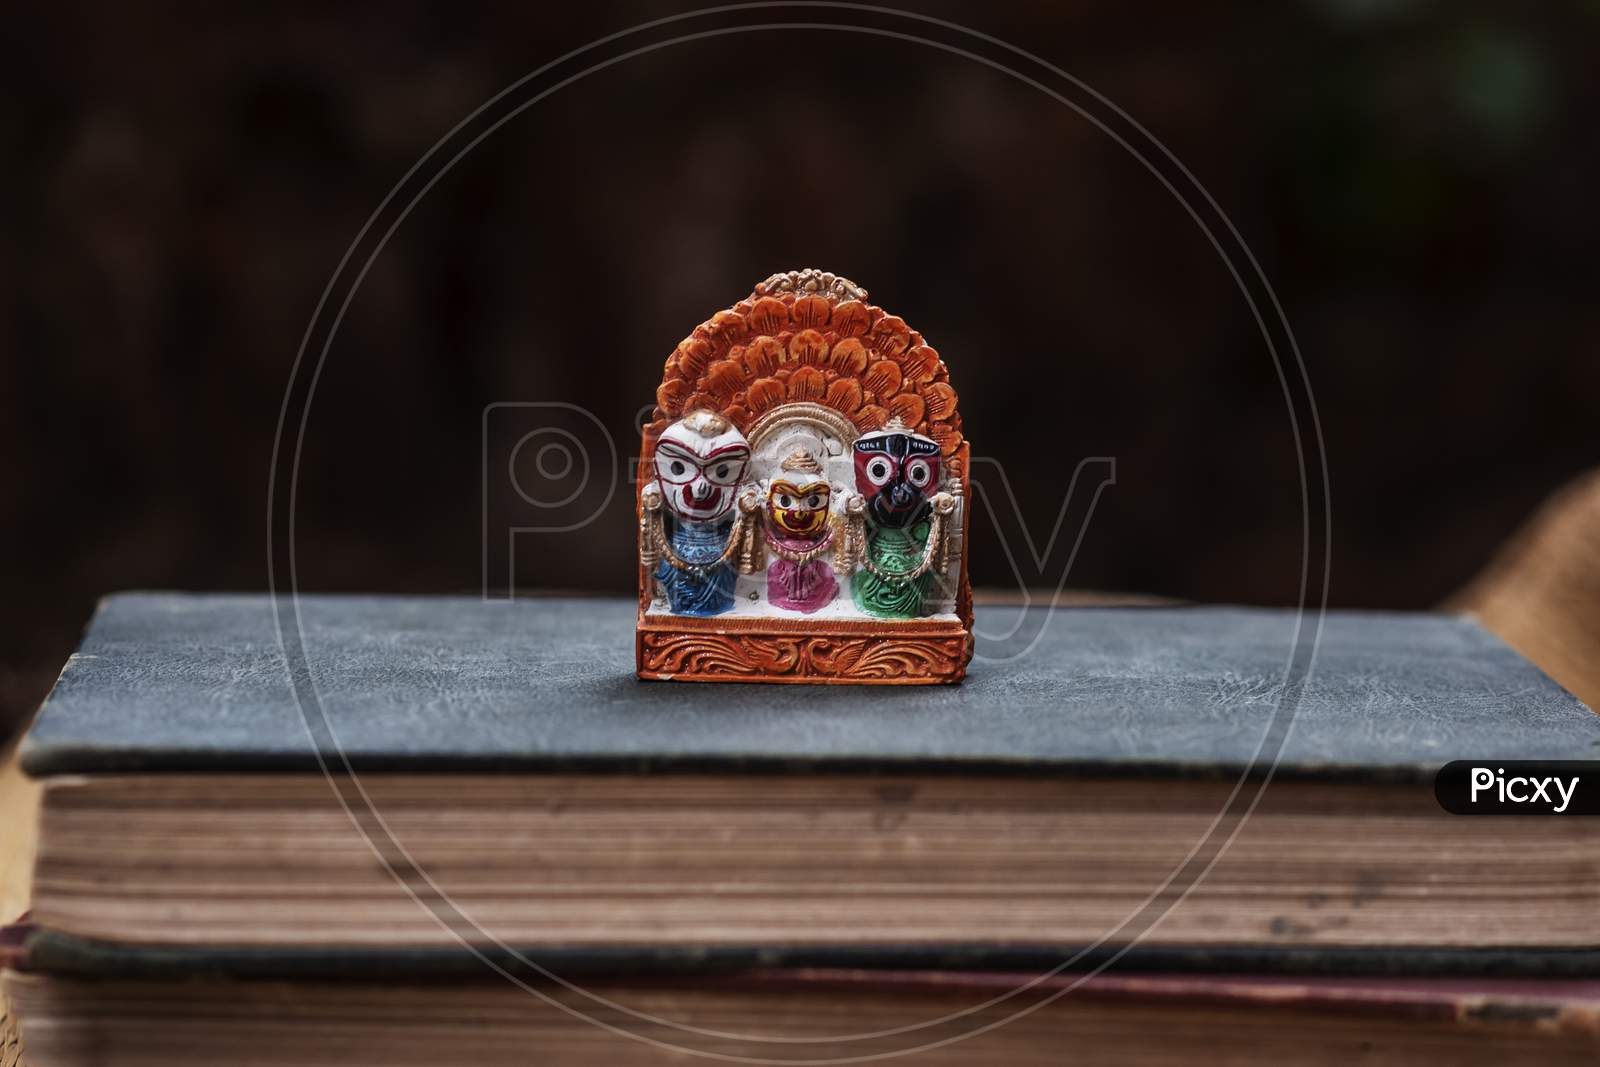 An idol of Lord Jaganath kept in a old book with dark wall in the background